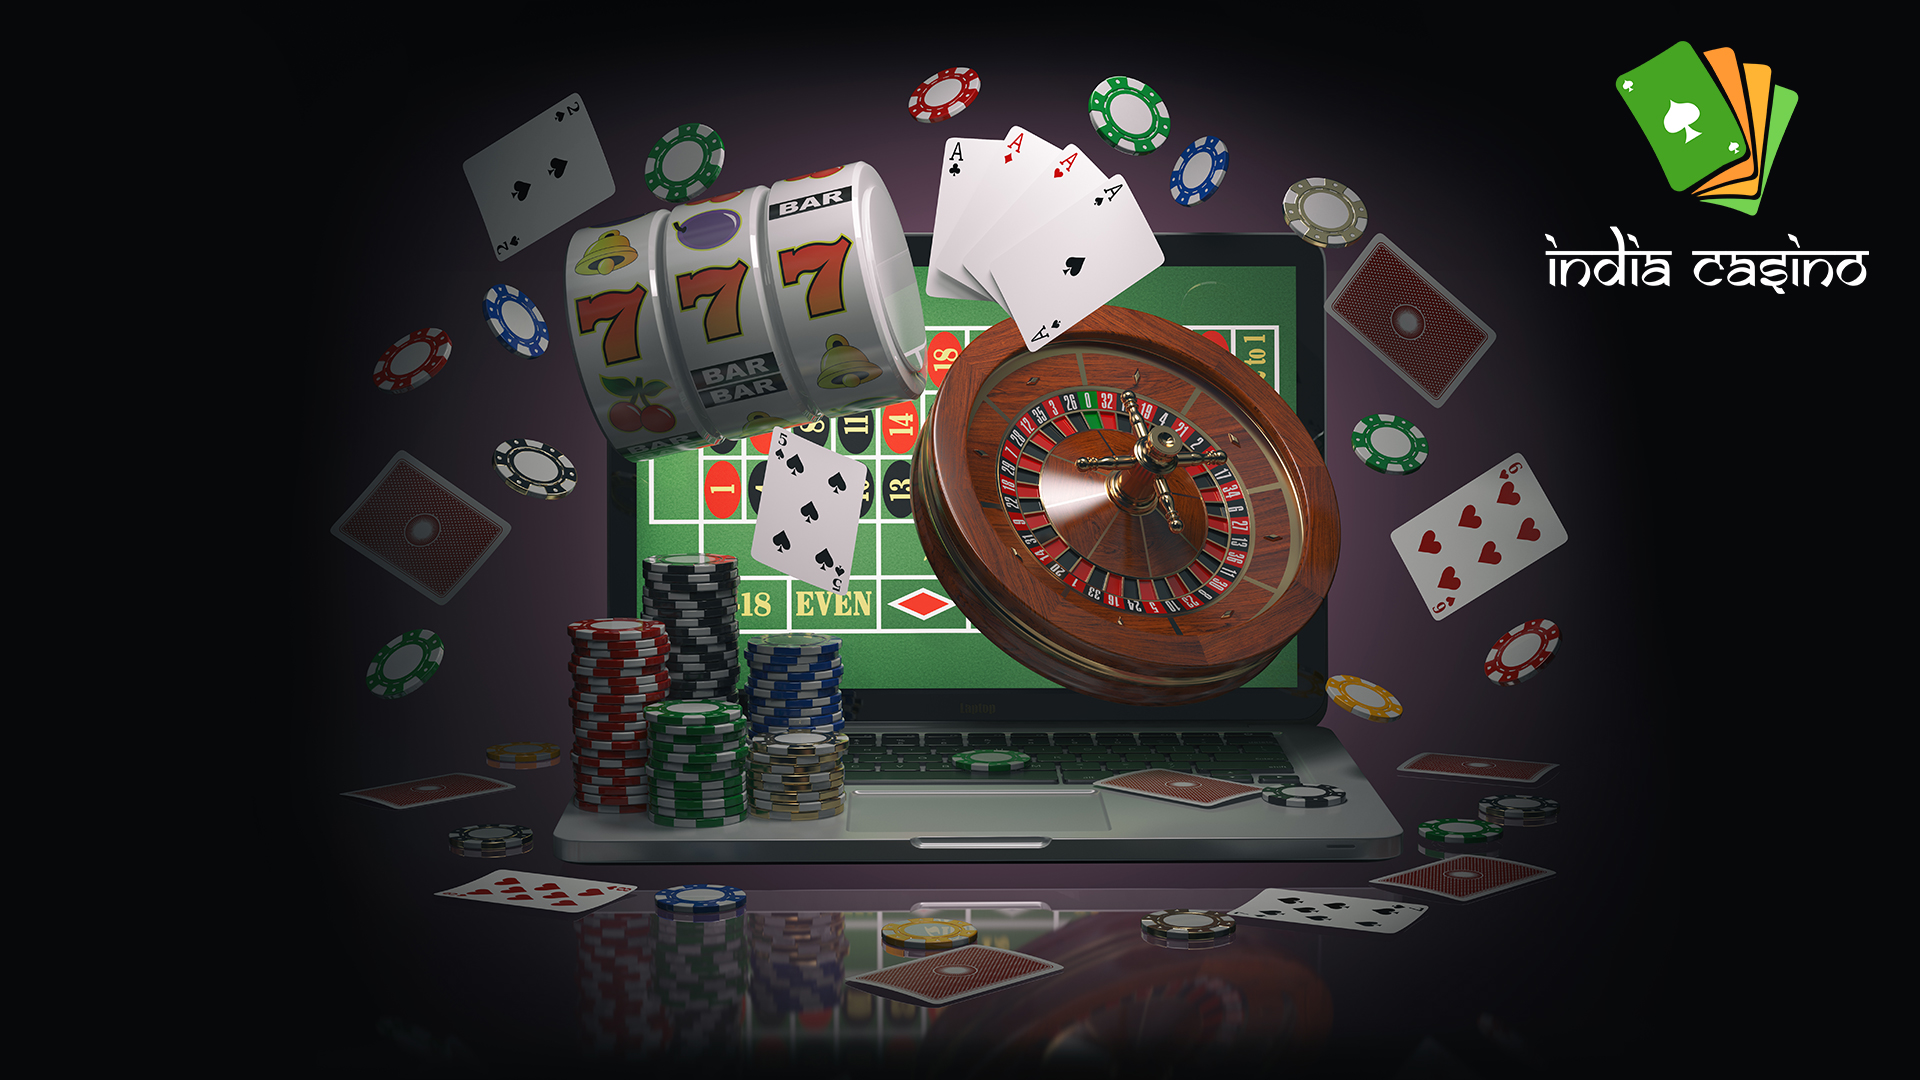 Play betting games online